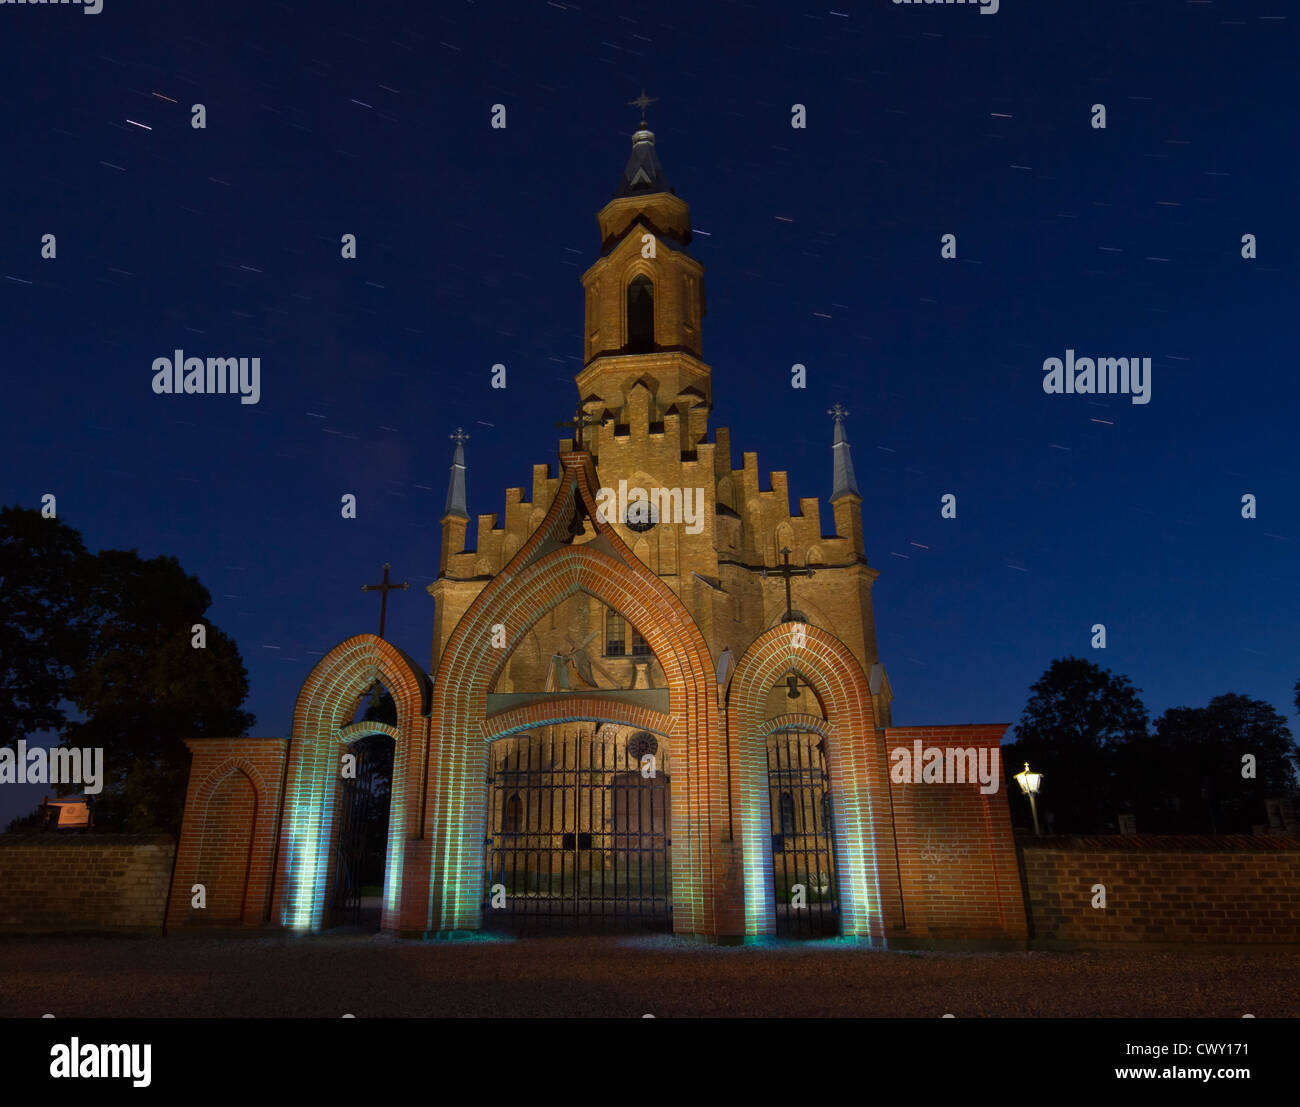 old church in the Gothic style at night, Kernave, Lithuania Stock Photo